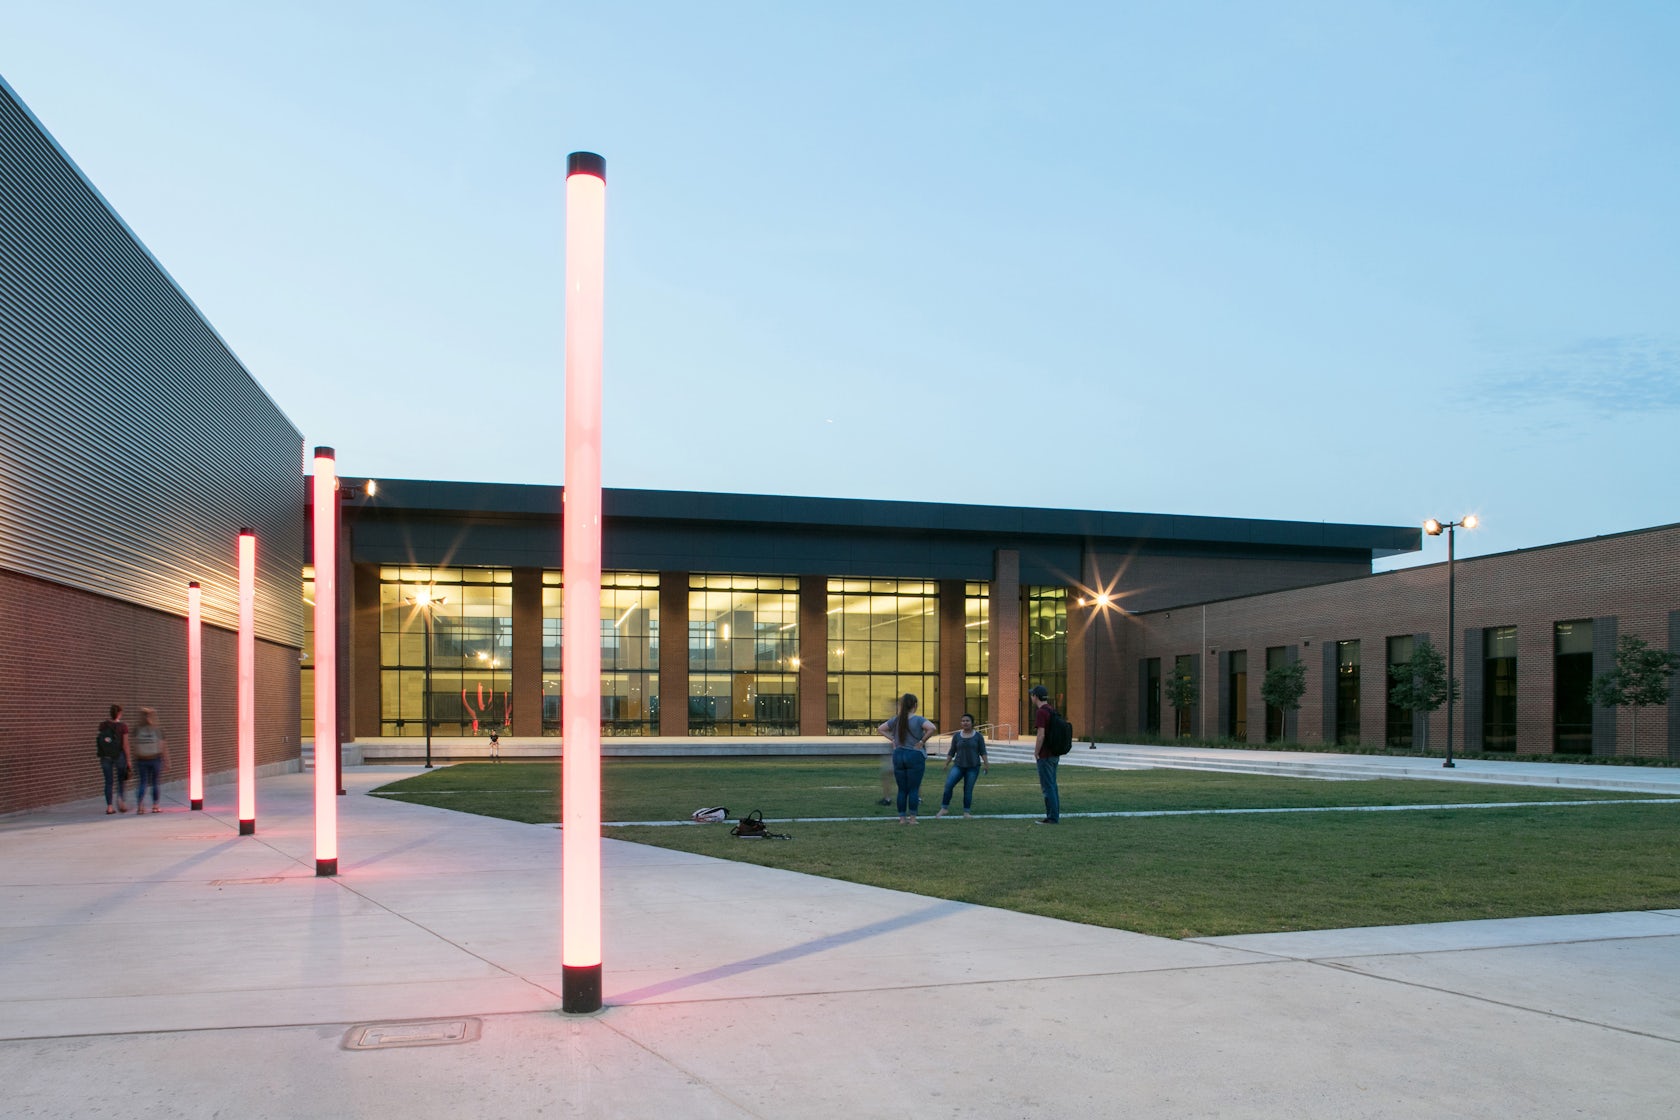 ray-braswell-high-school-by-vlk-architects-architizer